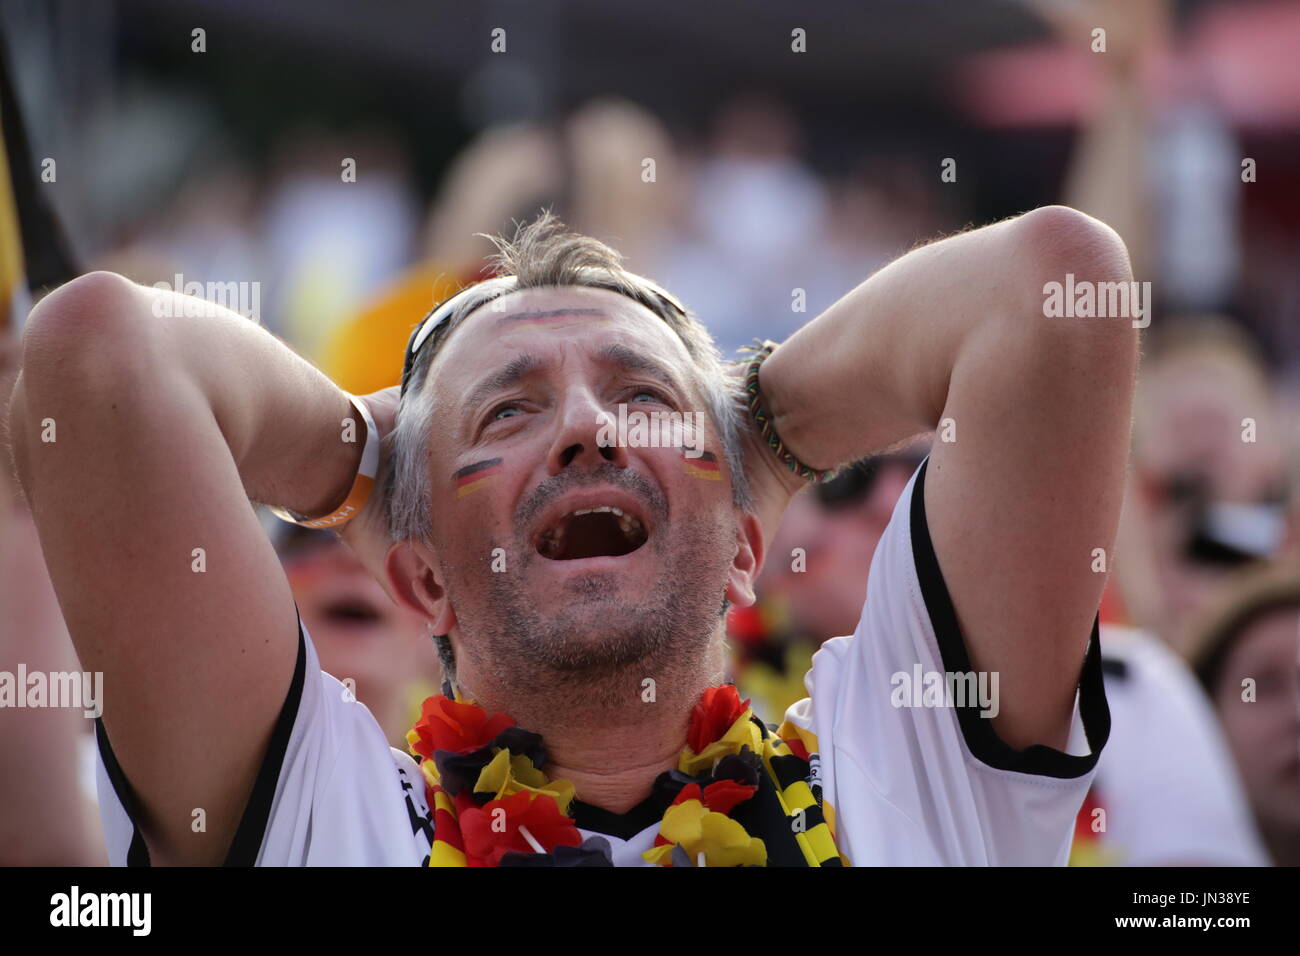 Fans watching FIFA Worldcup game Germany vs France at Fanmeile Berlin Stock Photo